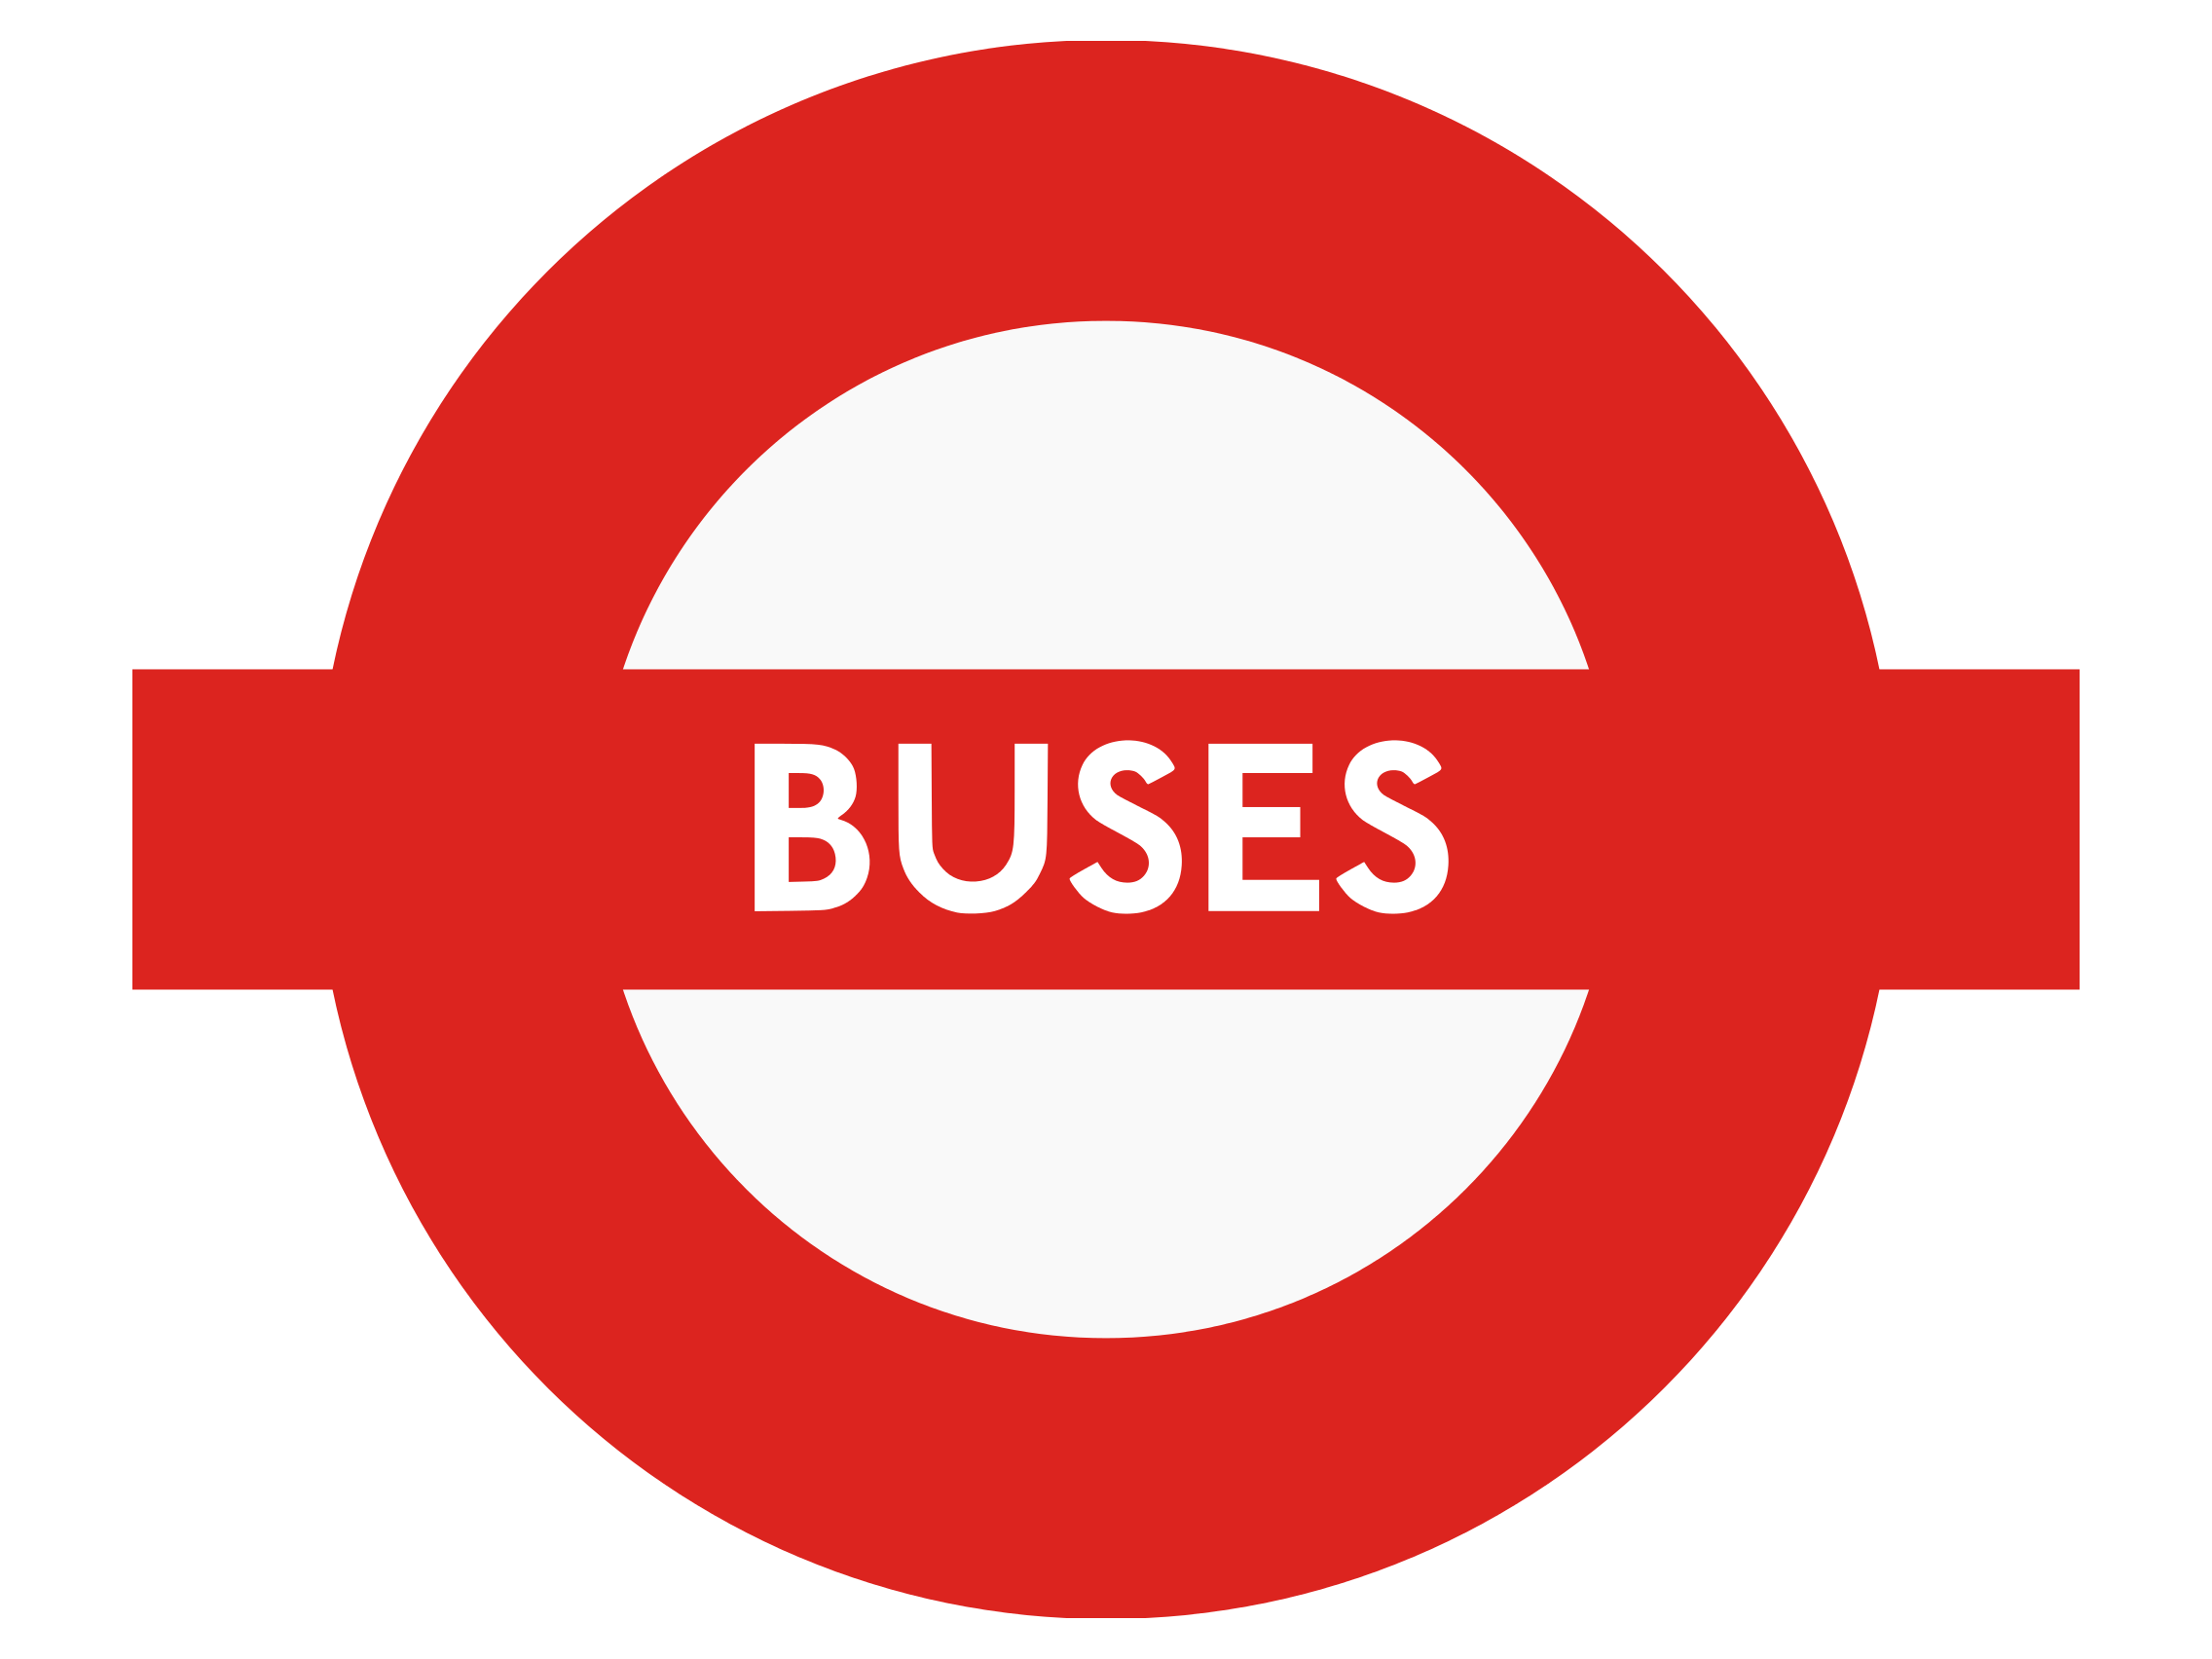 London Buses rounded logo